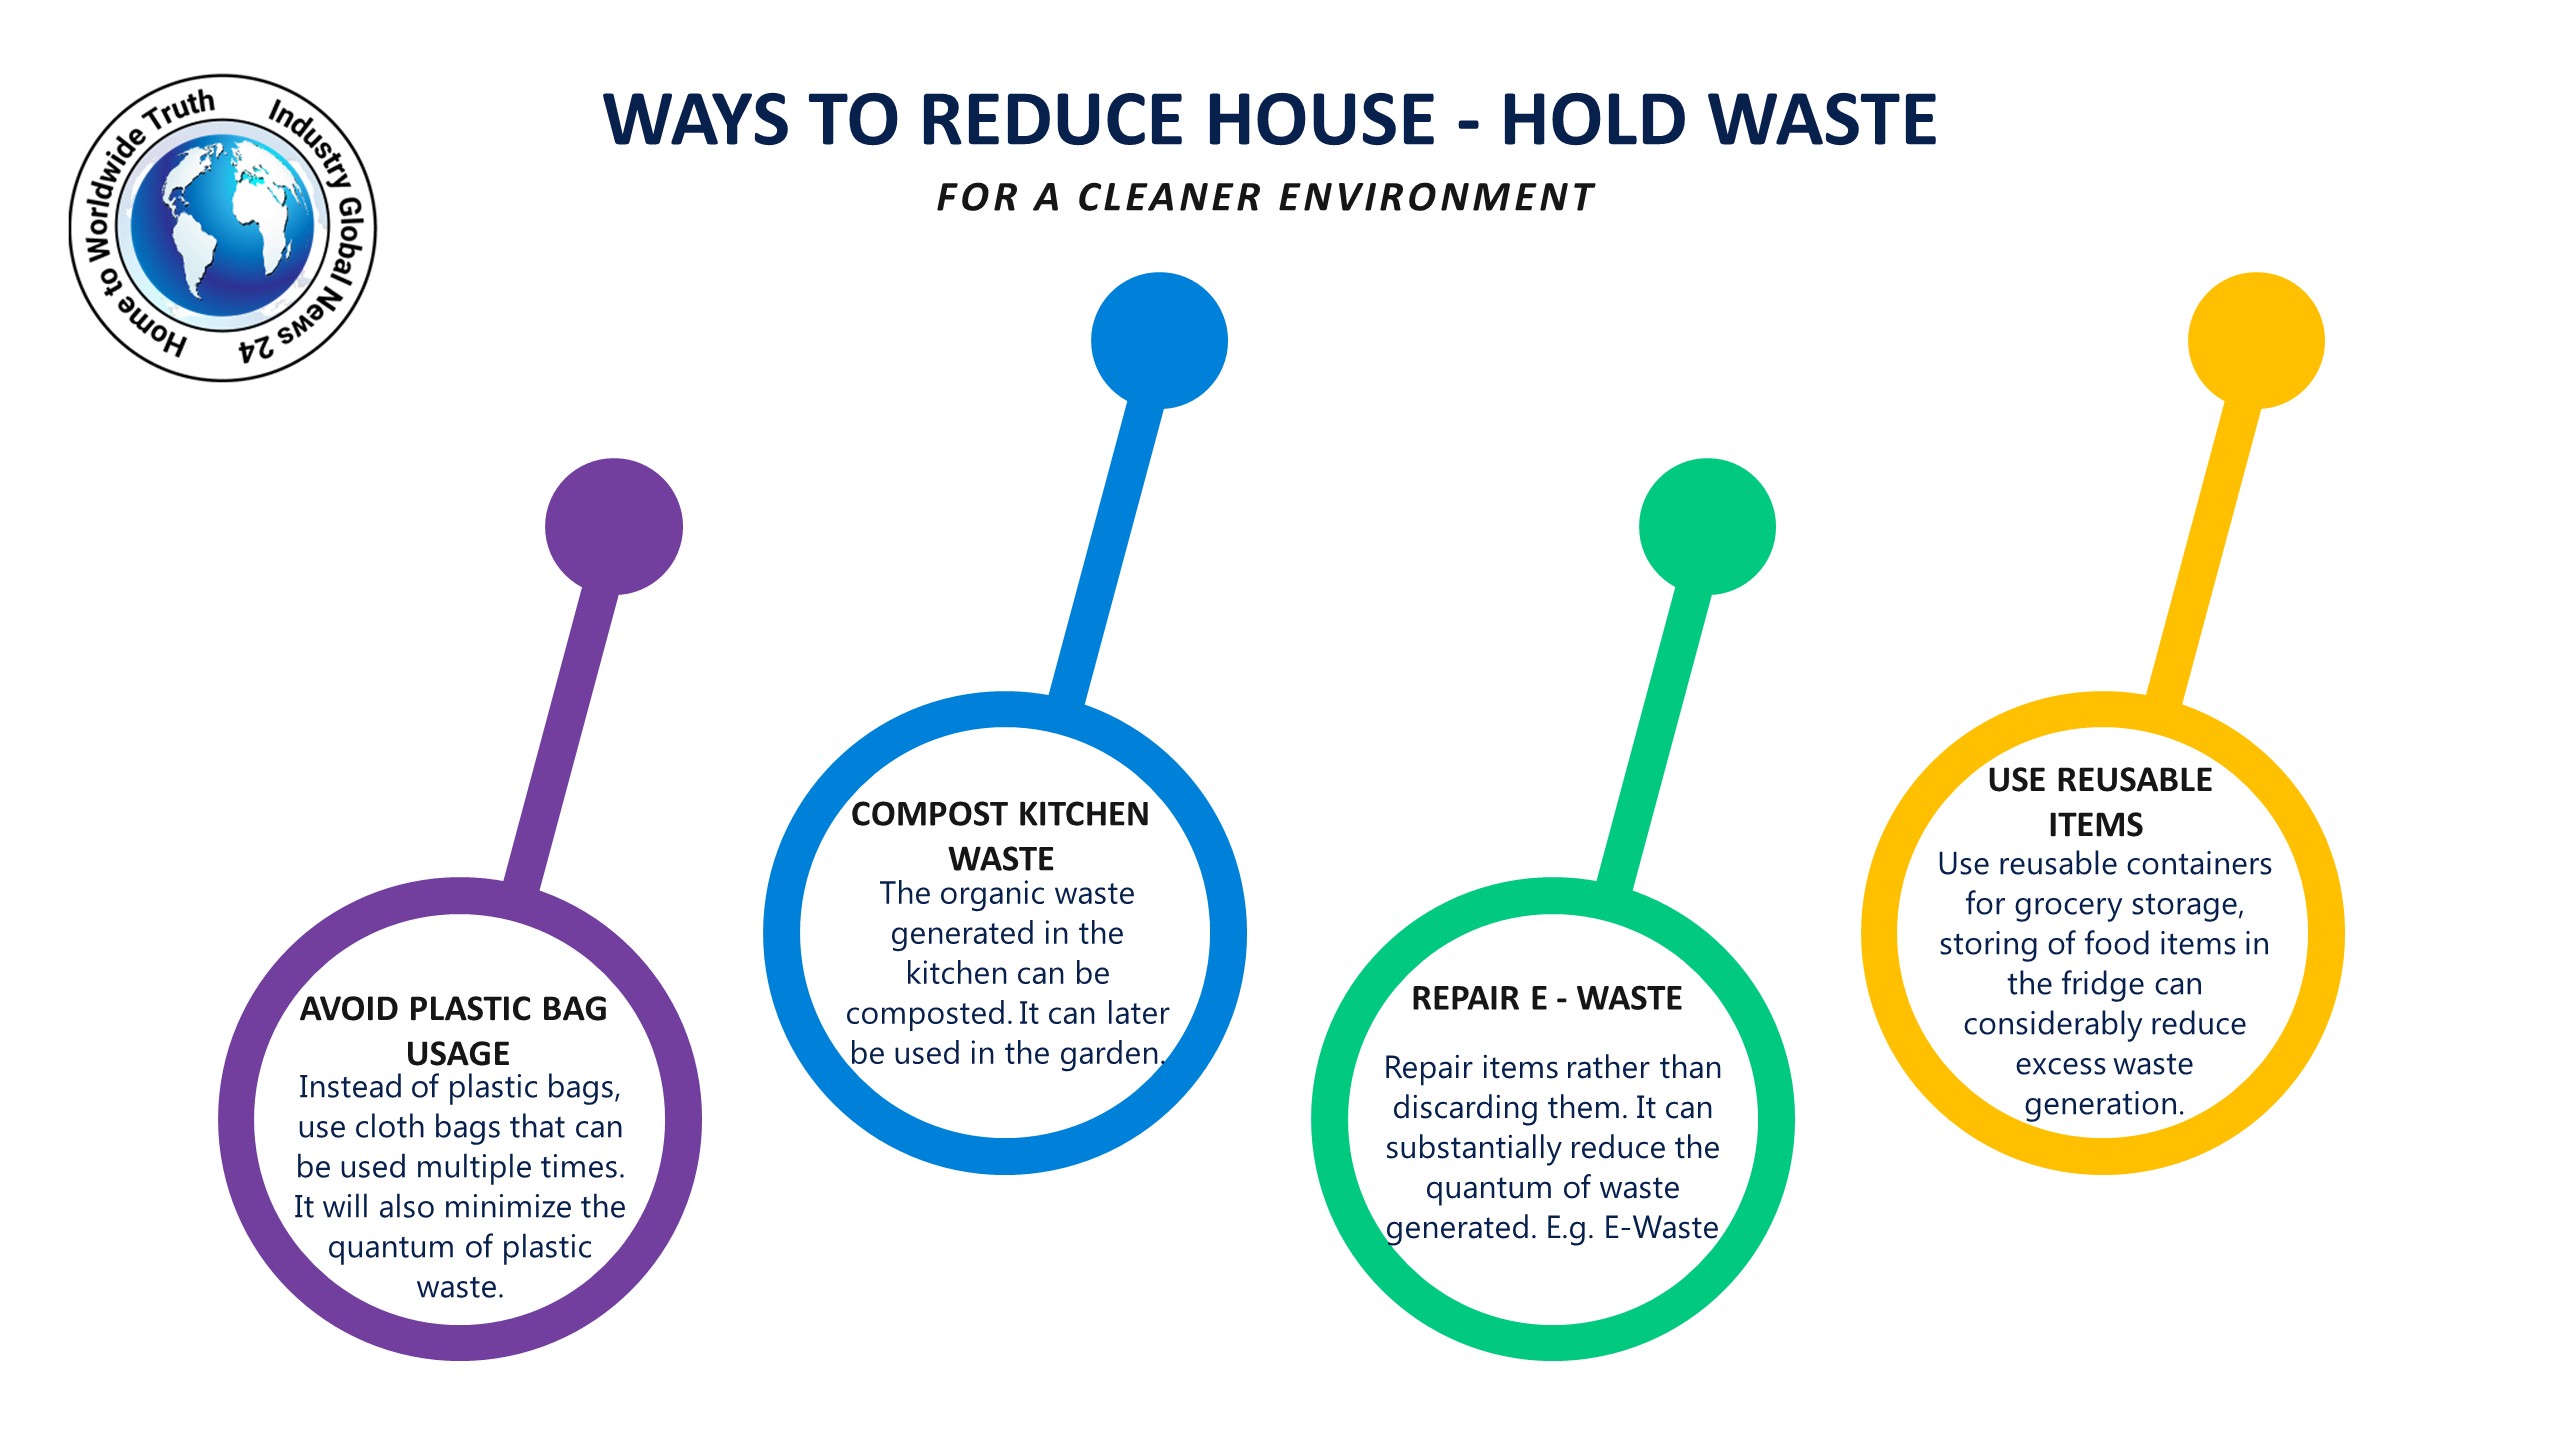 WAY TO REDUCE HOUSE - HOLD WASTE